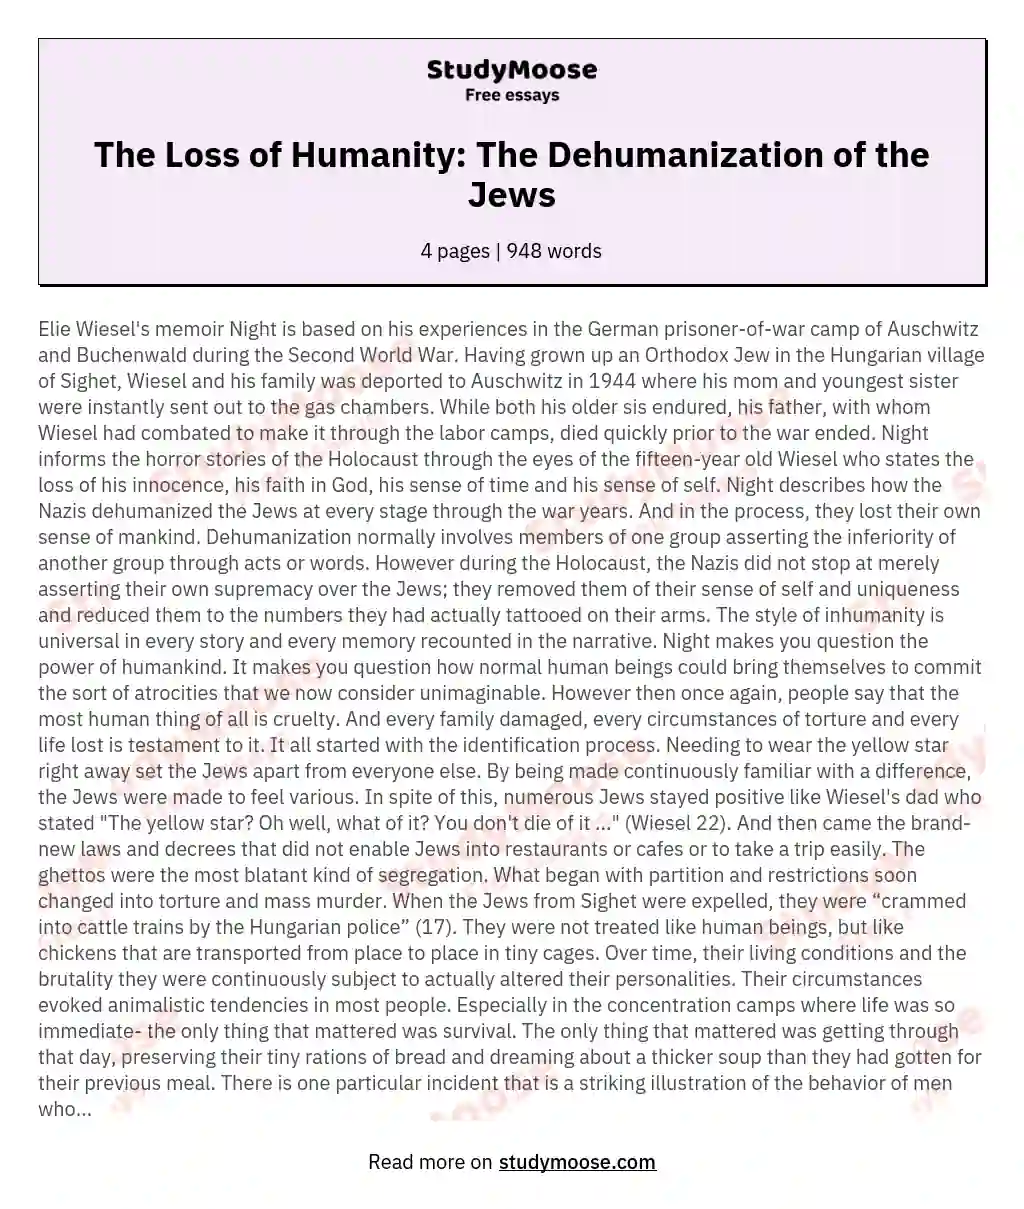 The Loss of Humanity: The Dehumanization of the Jews essay